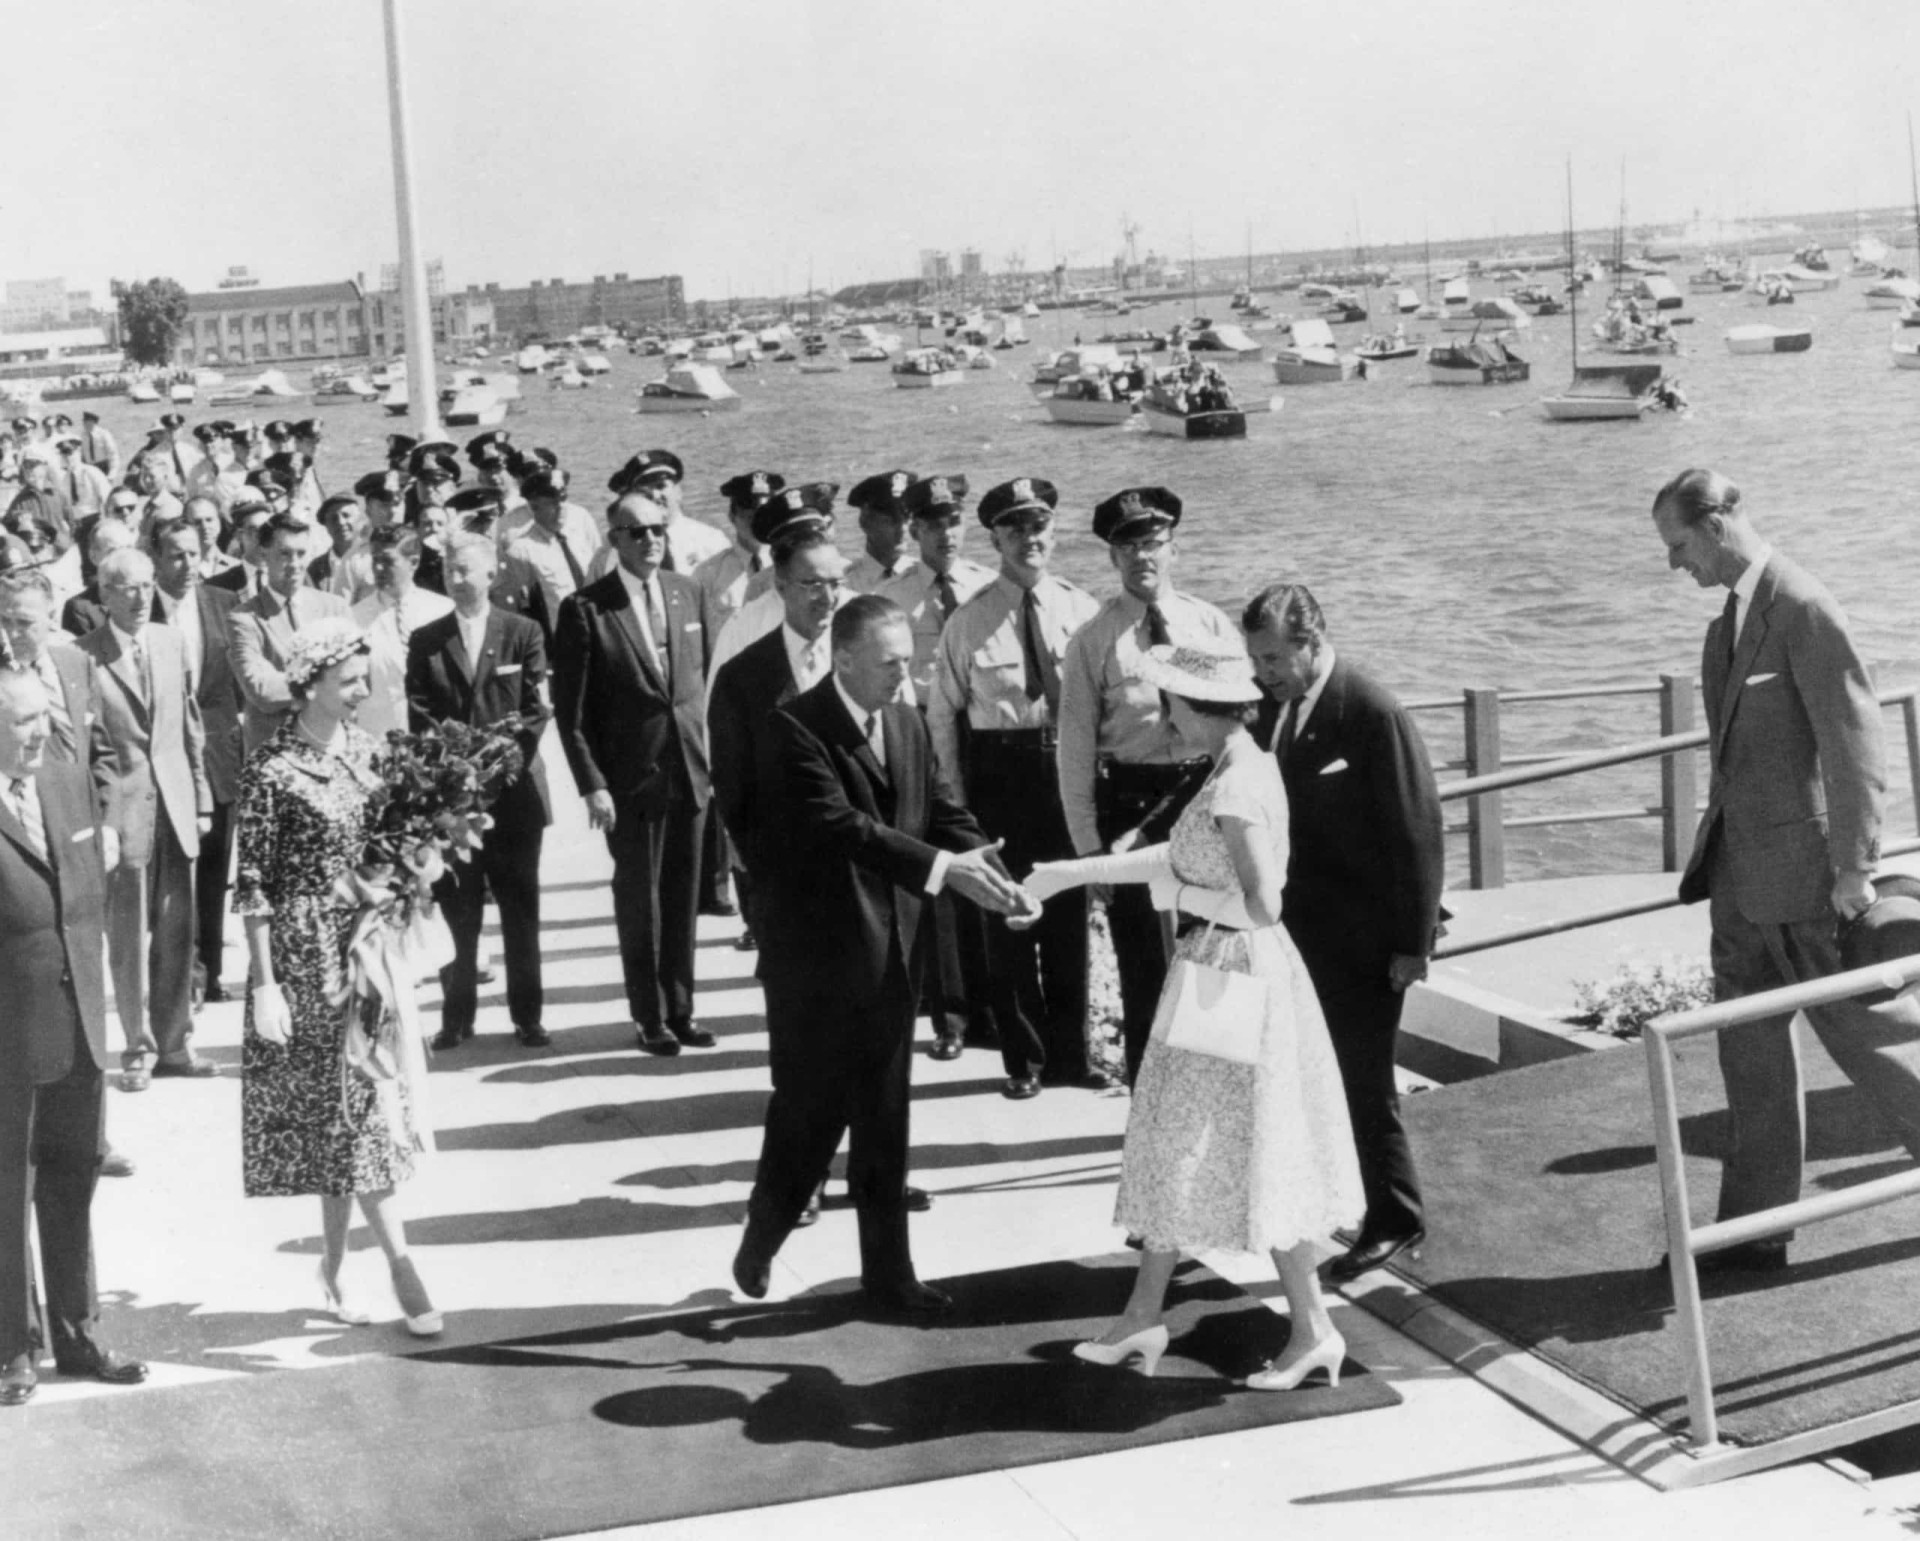 <p>Chicago's July 1959 royal welcome for the Queen and the Duke of Edinburgh was overwhelming. Some 6,000 vessels of all sizes jammed the harbor area to greet <em>Britannia</em> after having sailed the newly opened St. Lawrence Seaway. Queen Elizabeth, the first British monarch to visit Chicago, is pictured being welcomed by Illinois Governor William Straton. US President Dwight D. Eisenhower had been a guest during part of the voyage, having been invited to take part in the opening ceremony of the St. Lawrence Seaway.</p><p><a href="https://www.msn.com/en-us/community/channel/vid-7xx8mnucu55yw63we9va2gwr7uihbxwc68fxqp25x6tg4ftibpra?cvid=94631541bc0f4f89bfd59158d696ad7e">Follow us and access great exclusive content every day</a></p>